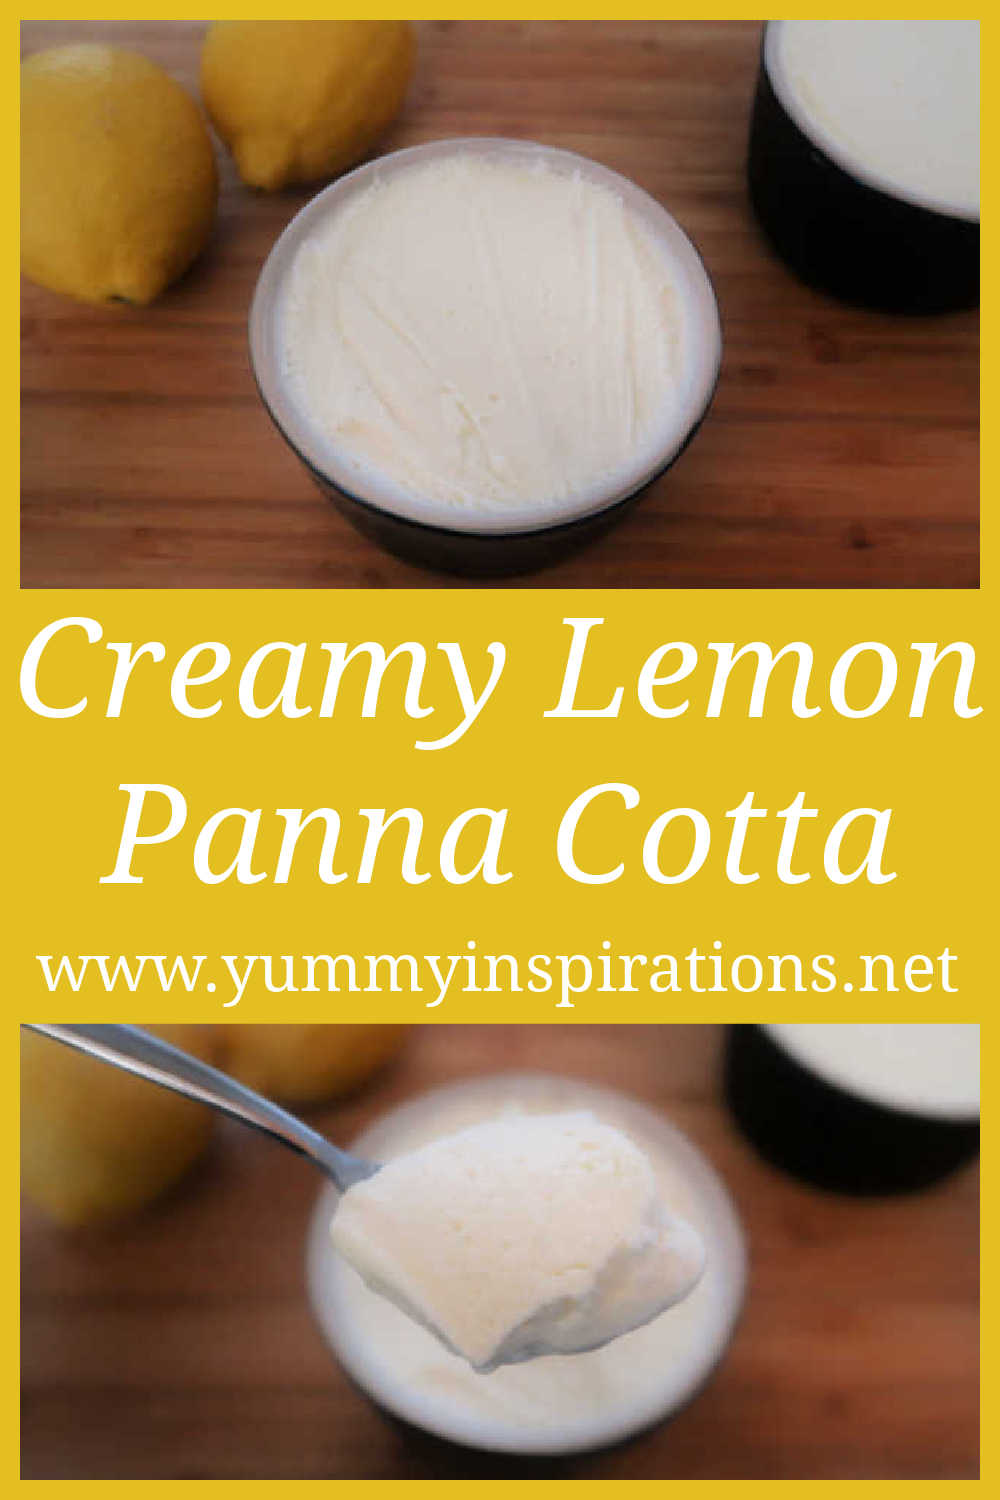 Lemon Panna Cotta Recipe - How to make a great, super easy and creamy dessert with lemons - with the video tutorial.